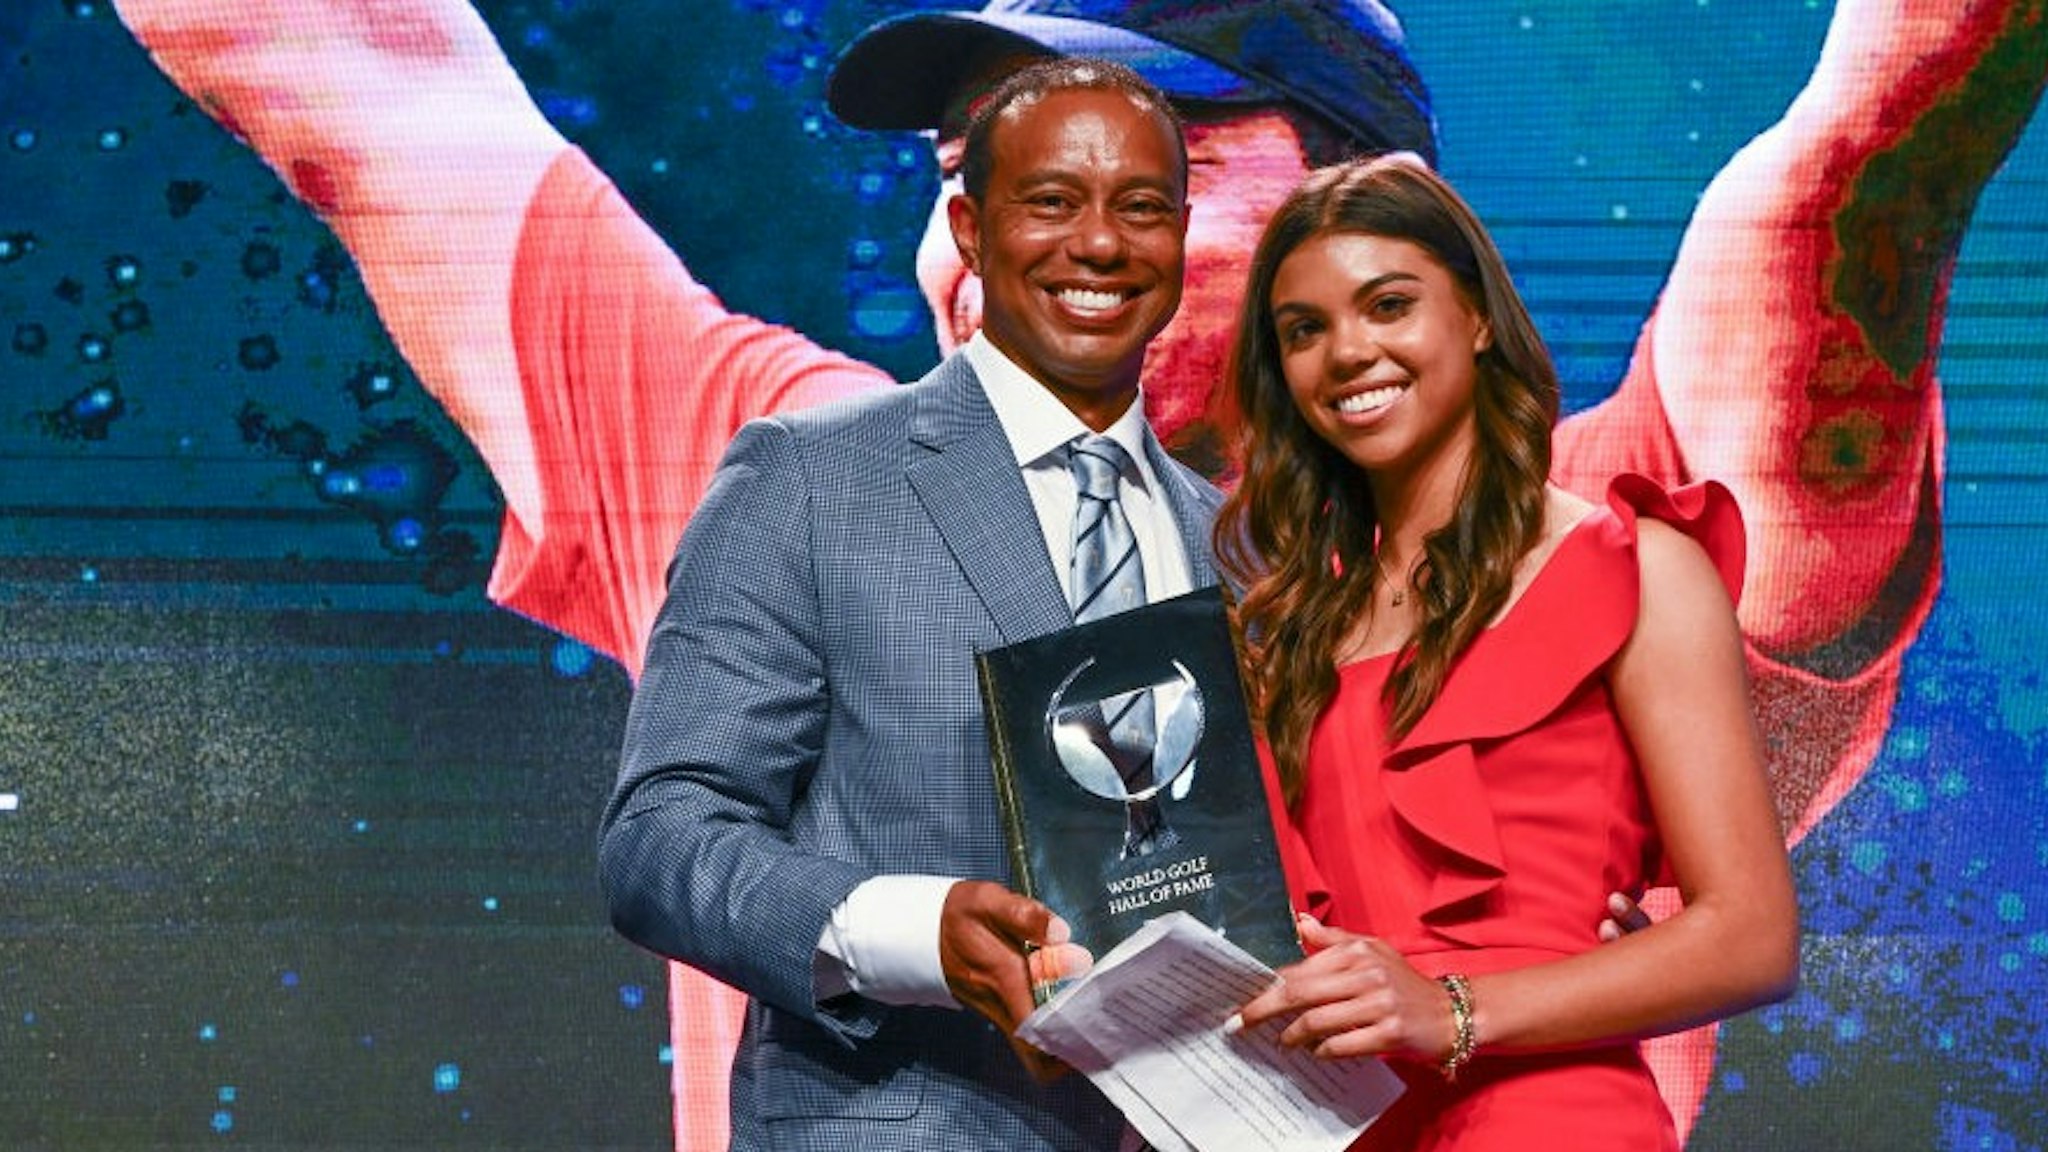 PONTE VEDRA BEACH, FL - MARCH 09: Tiger Woods and his daughter Sam, pose on stage during the World Golf Hall of Fame Induction Ceremony prior to THE PLAYERS Championship at PGA TOUR Global Home on March 9, 2022, in Ponte Vedra Beach, FL. (Photo by